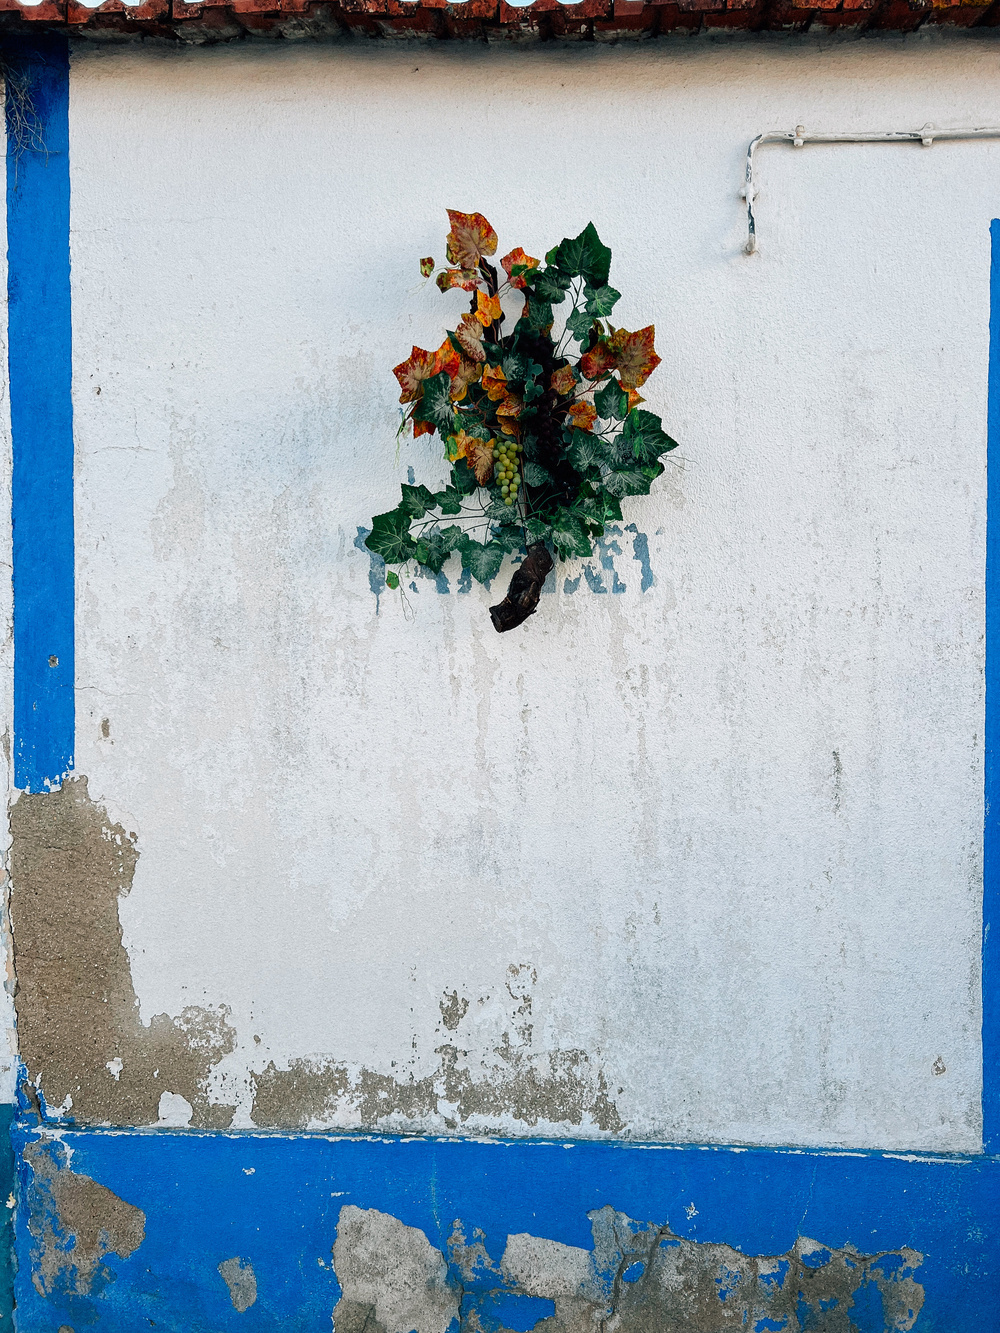 A plant growing out of a crack in an old white wall with blue accents and peeling paint.